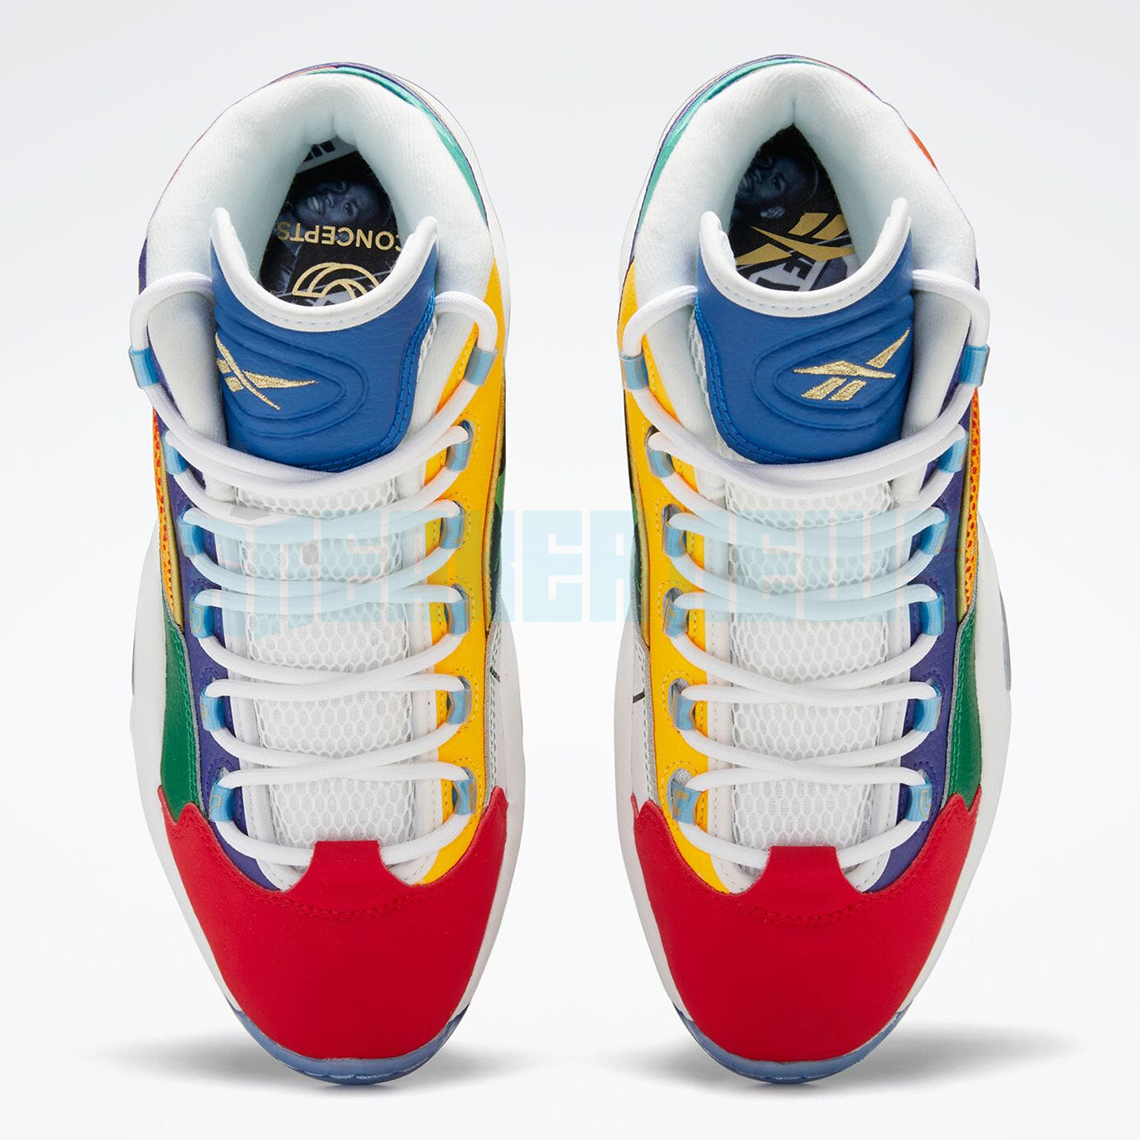 Concepts Reebok gx3521 Question Mid Release Date 9